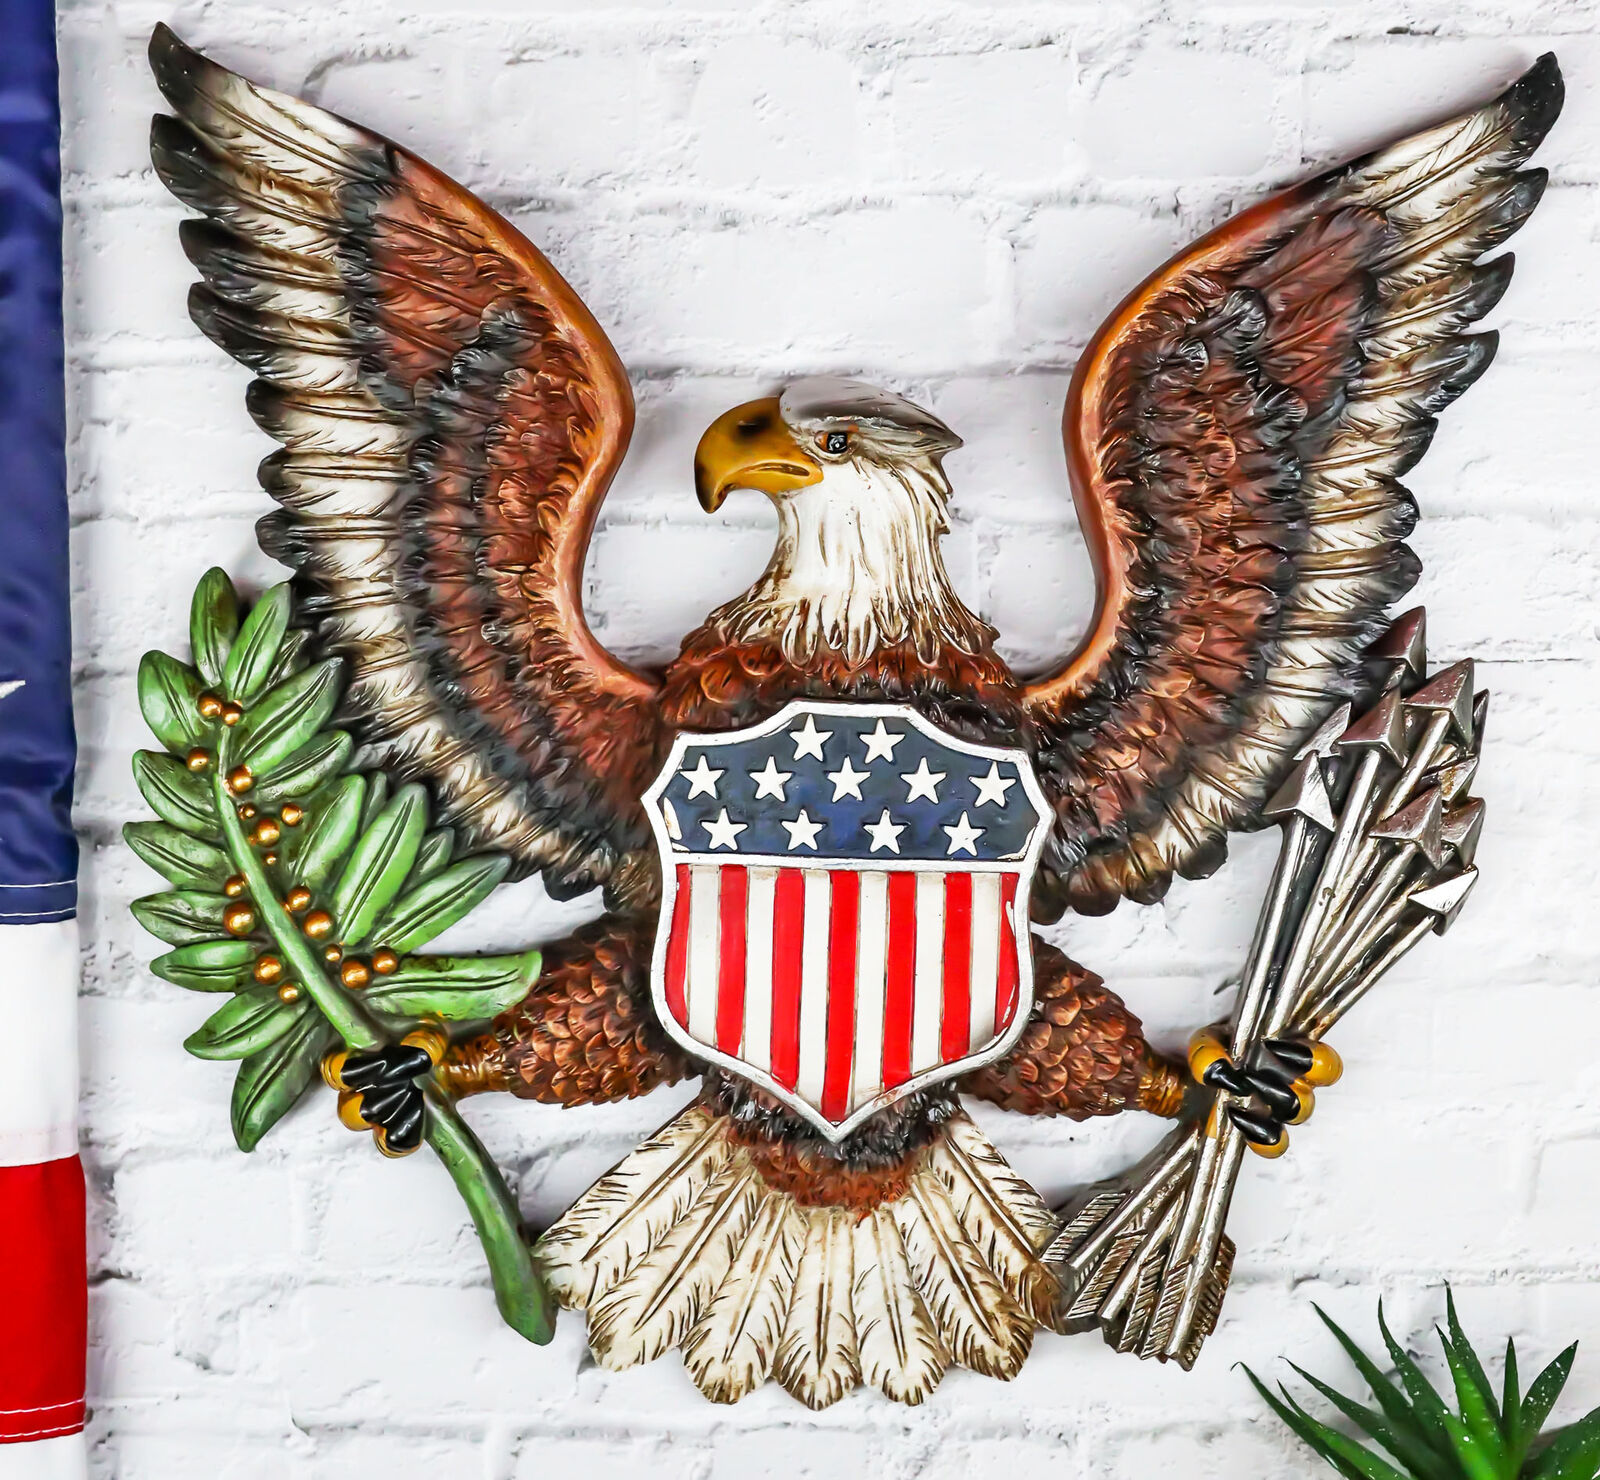 Patriotic American Great Seal Bald Eagle With Olive Branch And Arrows Wall Decor